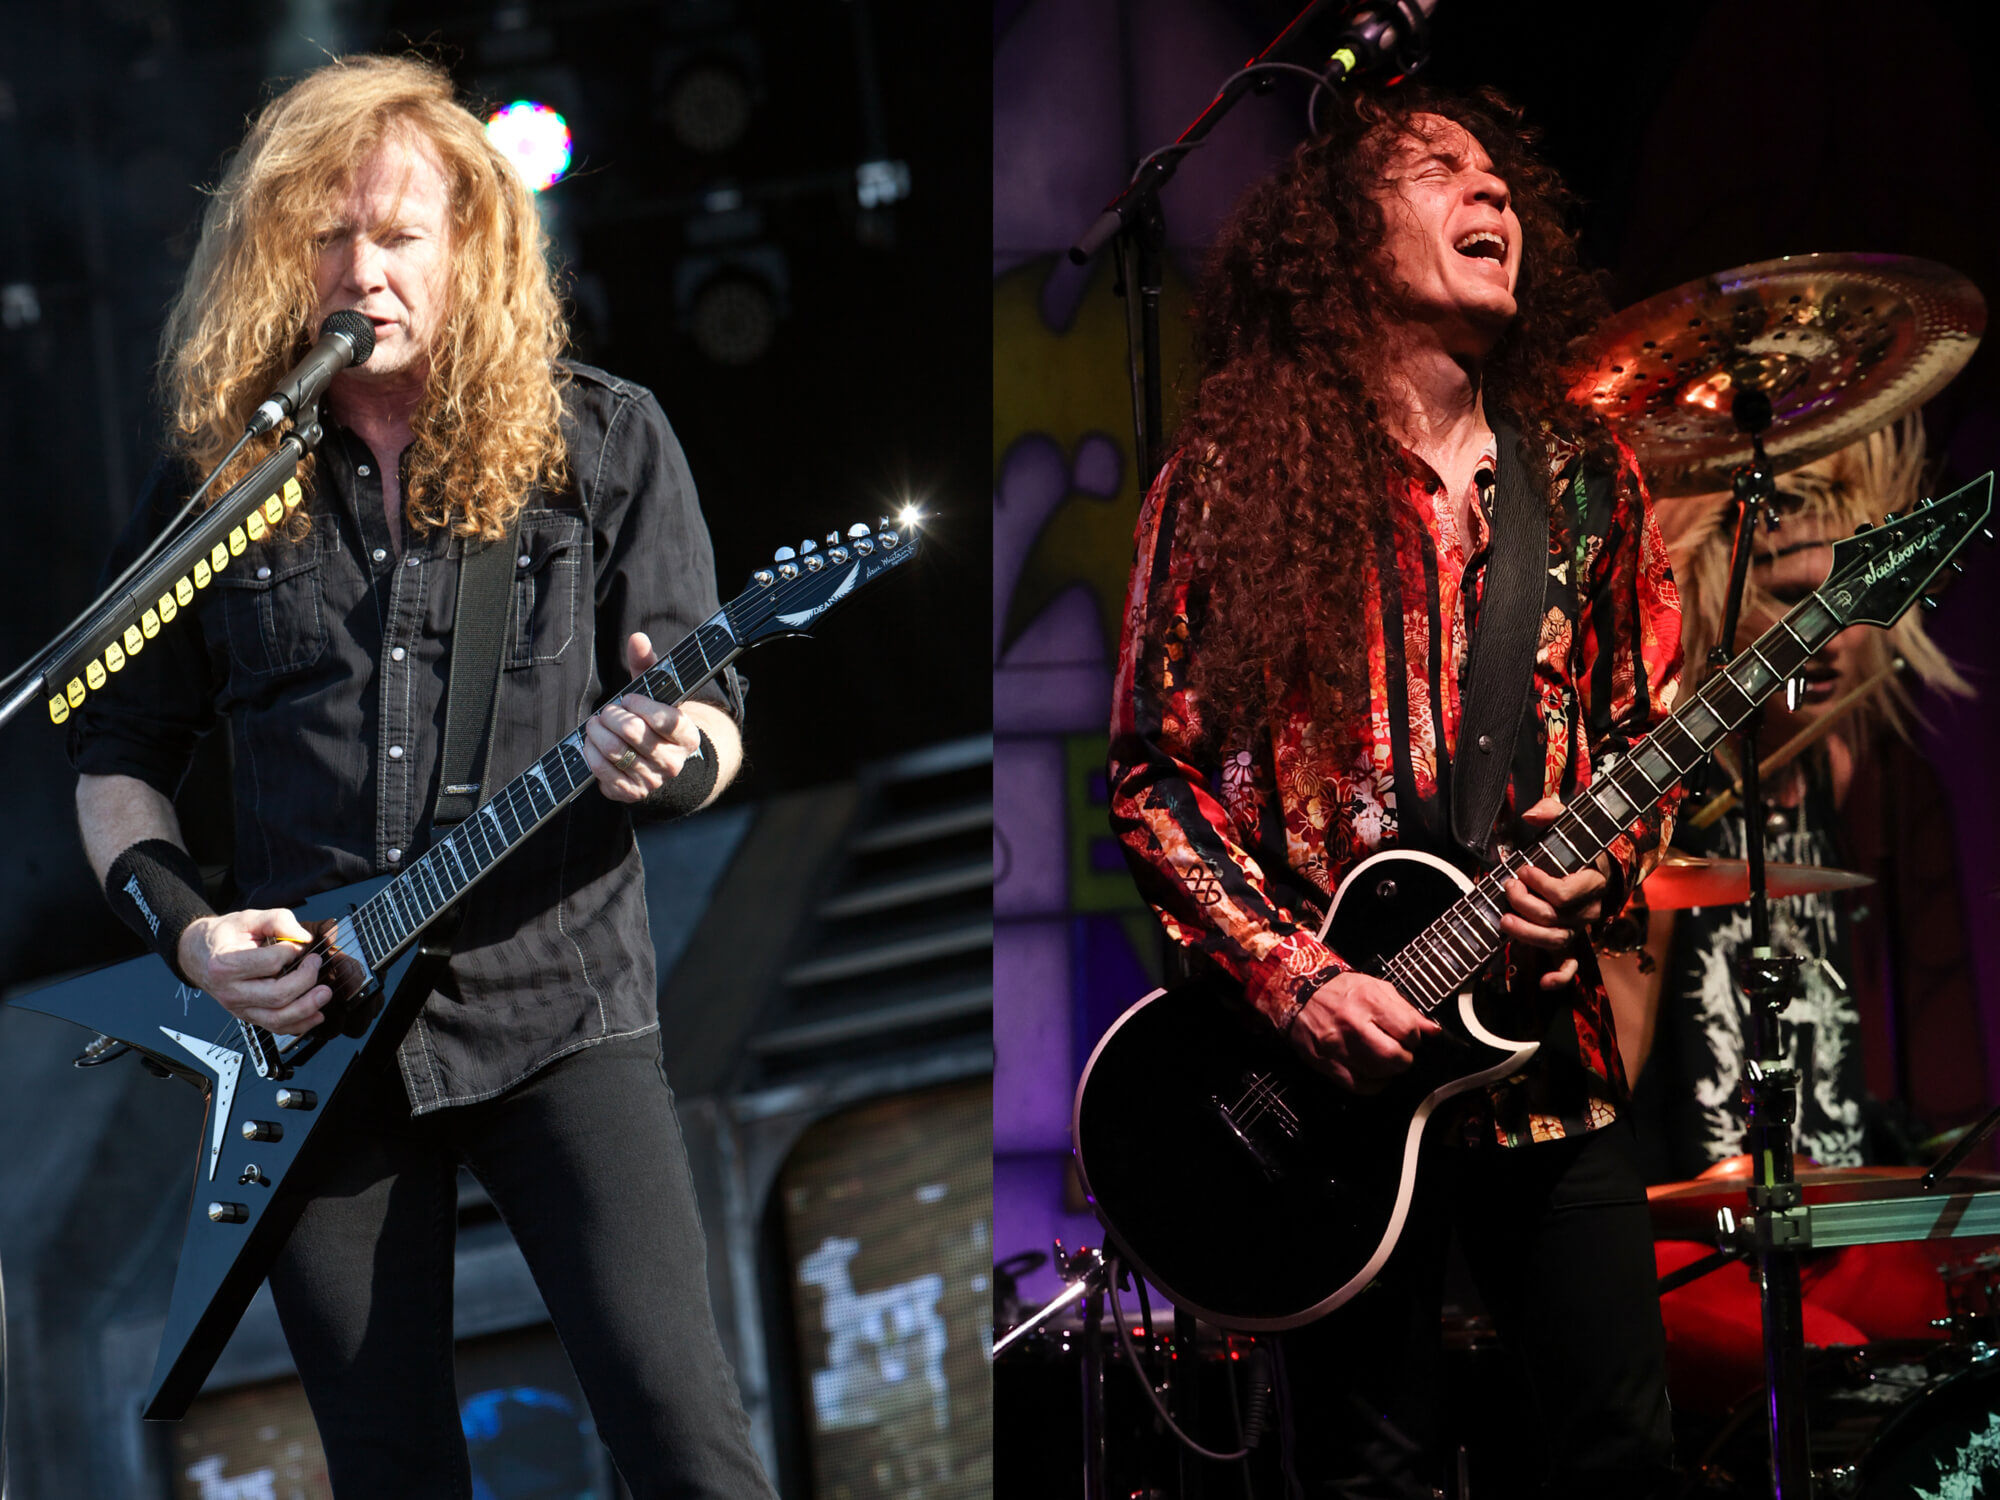 Dave Mustaine of Megadeth and Marty Friedman